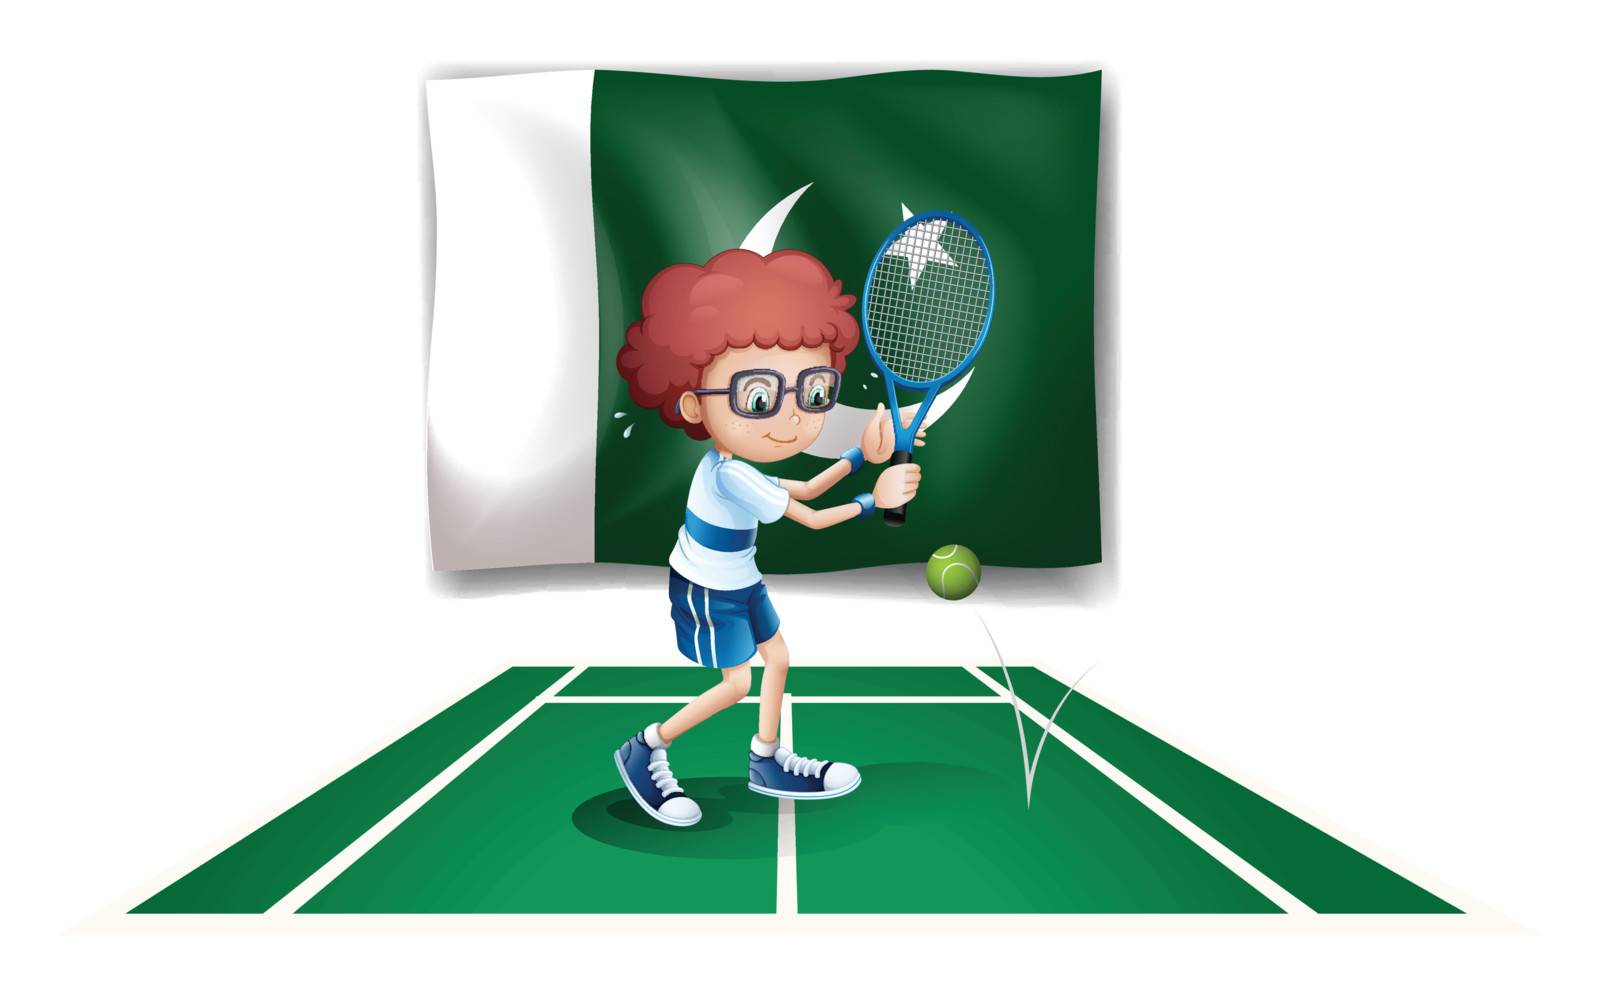 Illustration of a tennis player in front of the flag of Pakistan on a white background